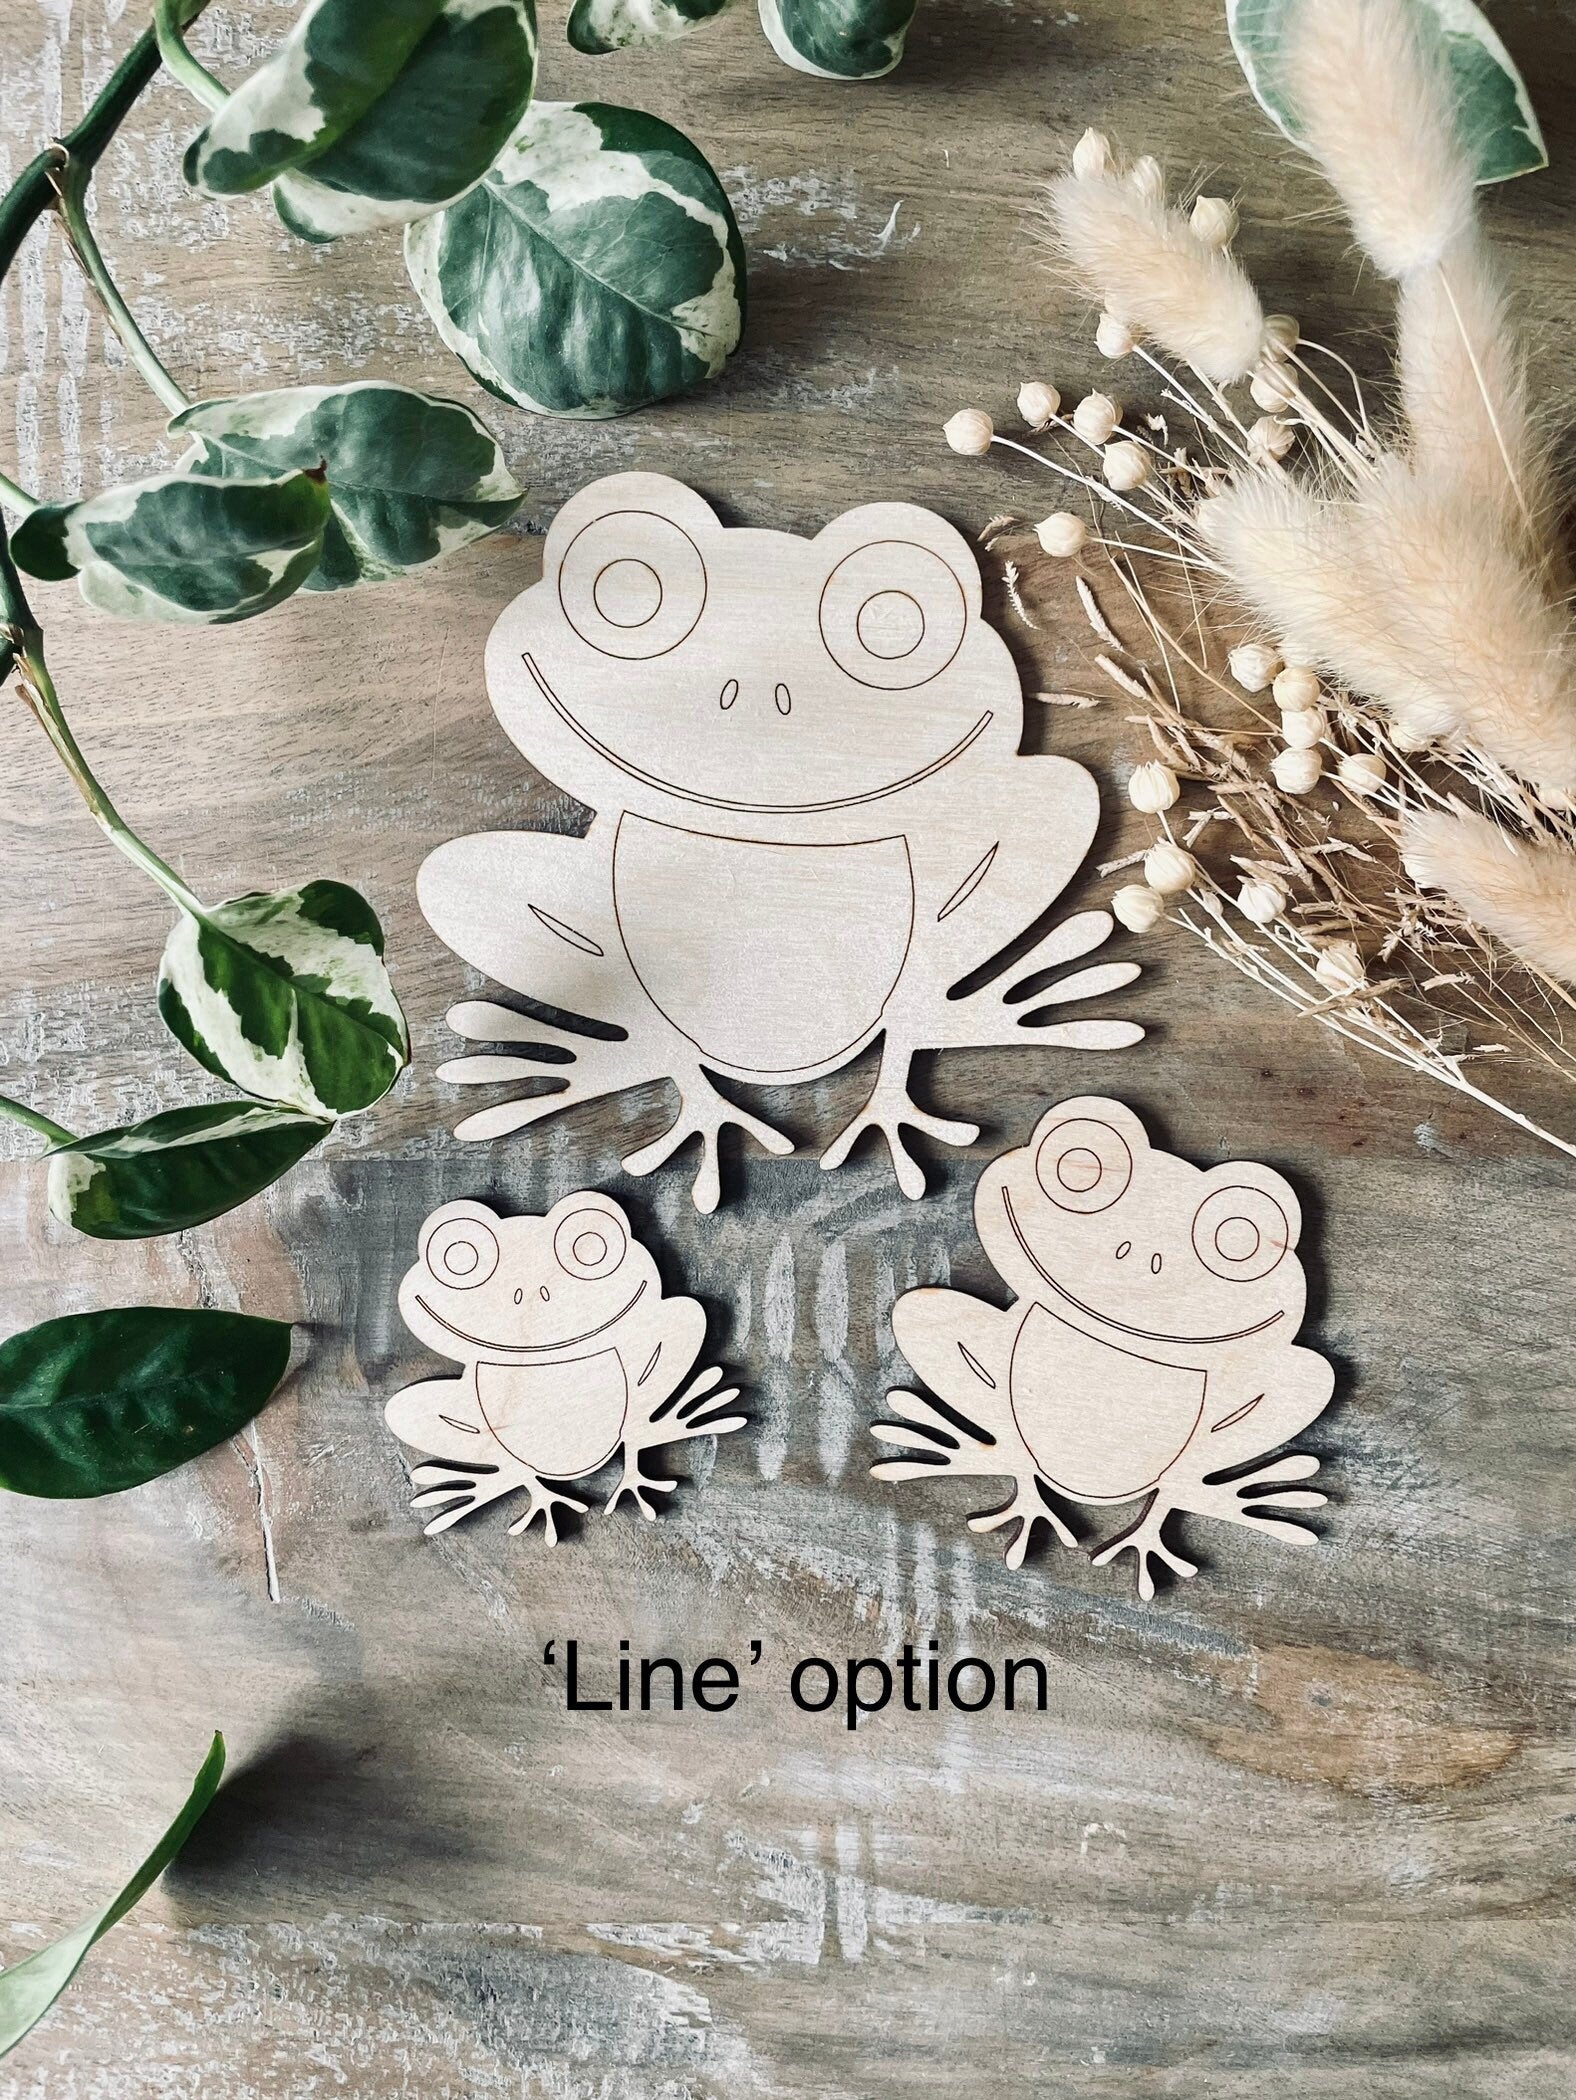 10x Wooden Frog Shapes from 40mm Tall | Frog and Toad | 3mm Thick Laser Cut Plywood Blanks | Frog Craft Shapes